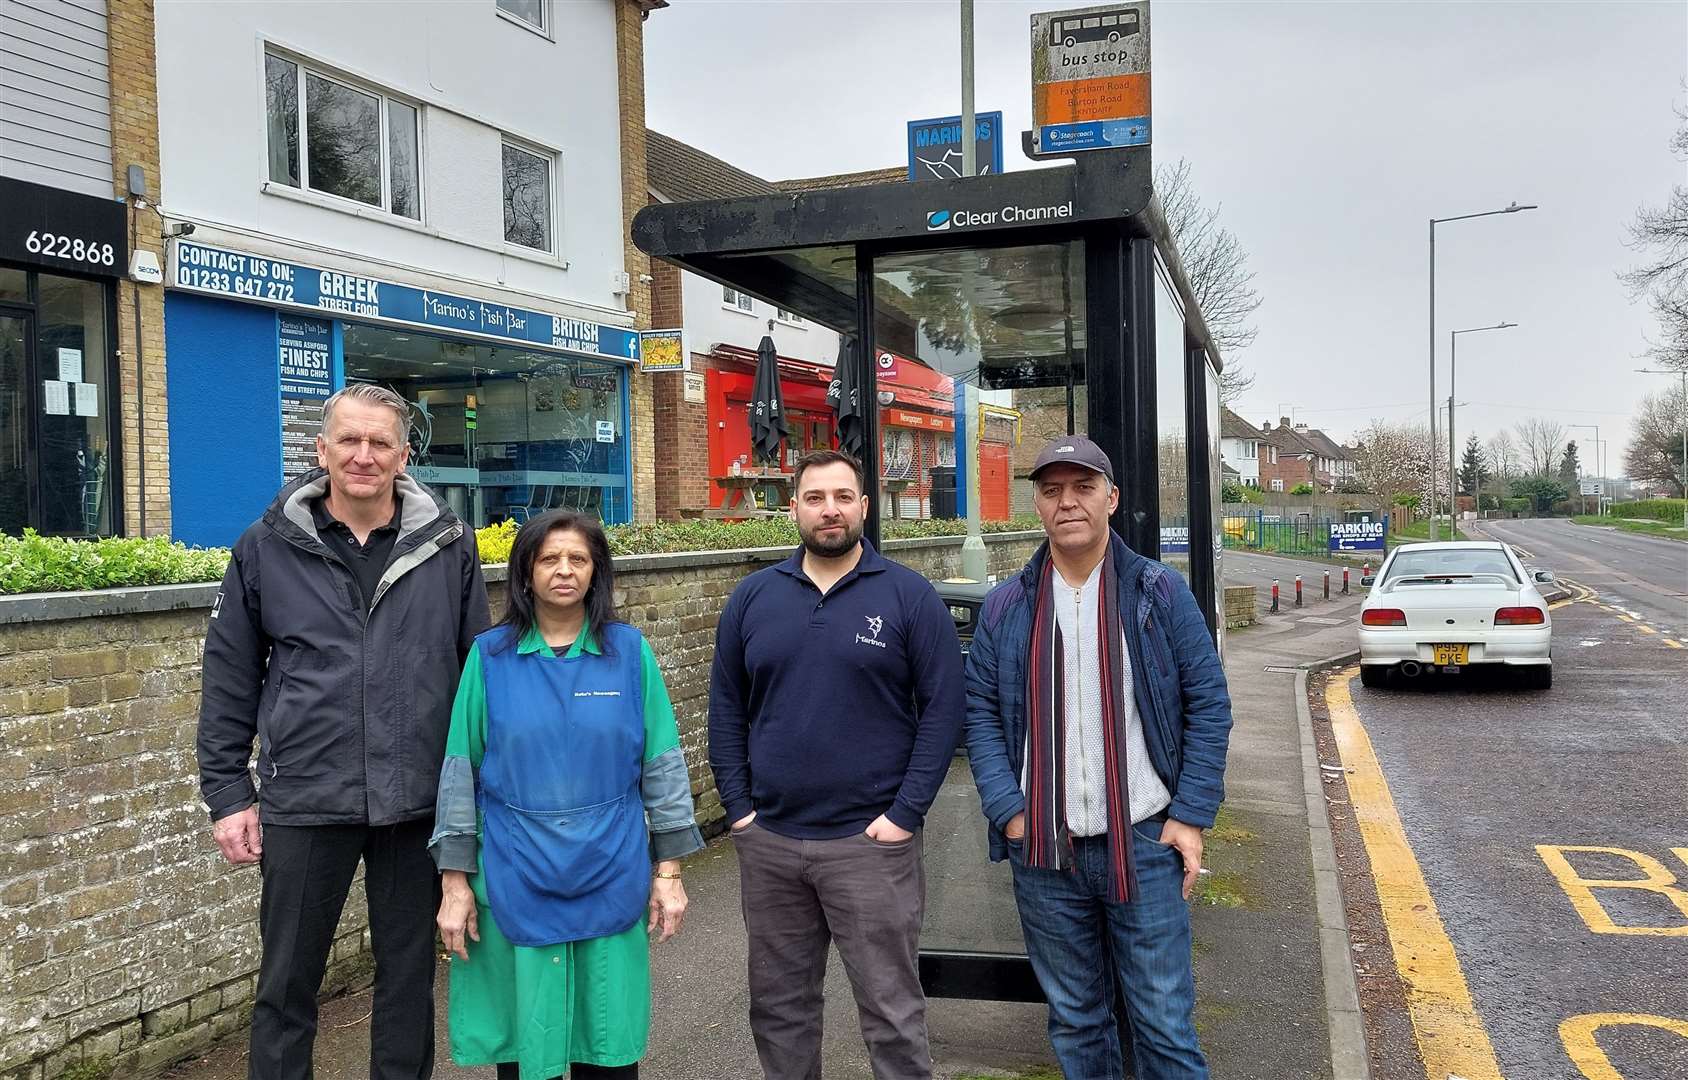 All four shop owners – Simon Hall, Bella Patel, Orthy Karios and Yakup Yalcin – agree moving the bus stop is the best option